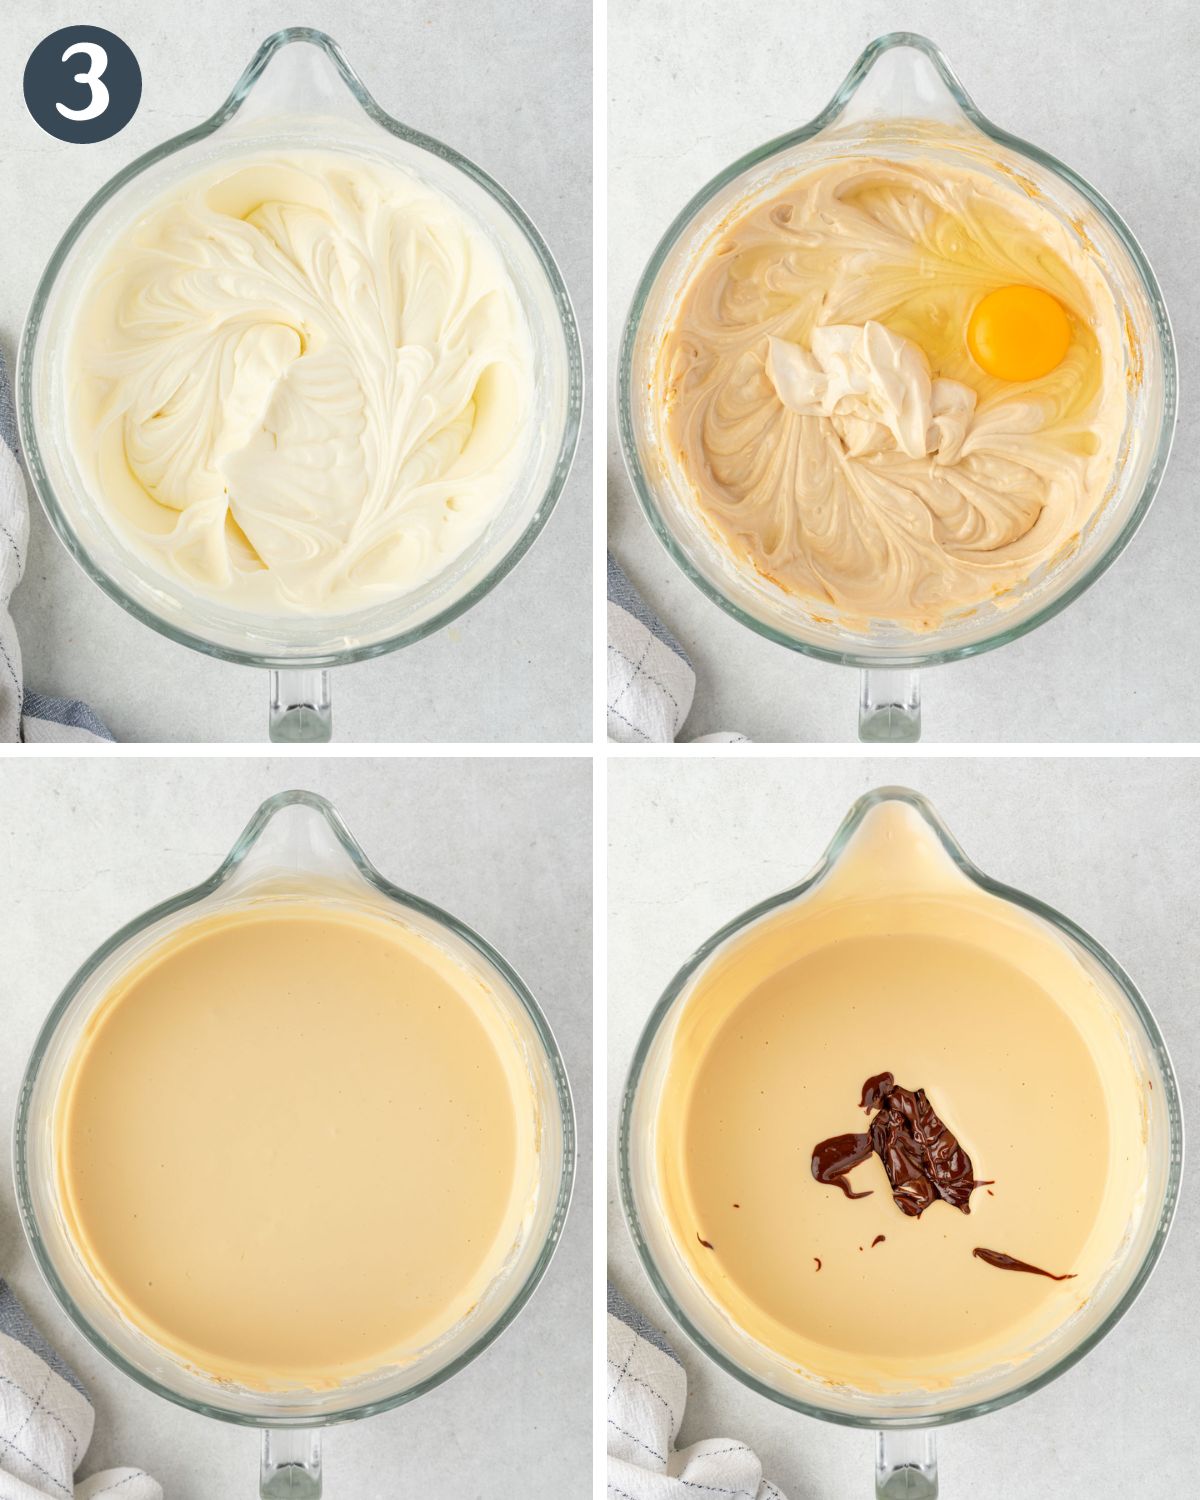 4 image collage showing the steps for making the creamy batter.